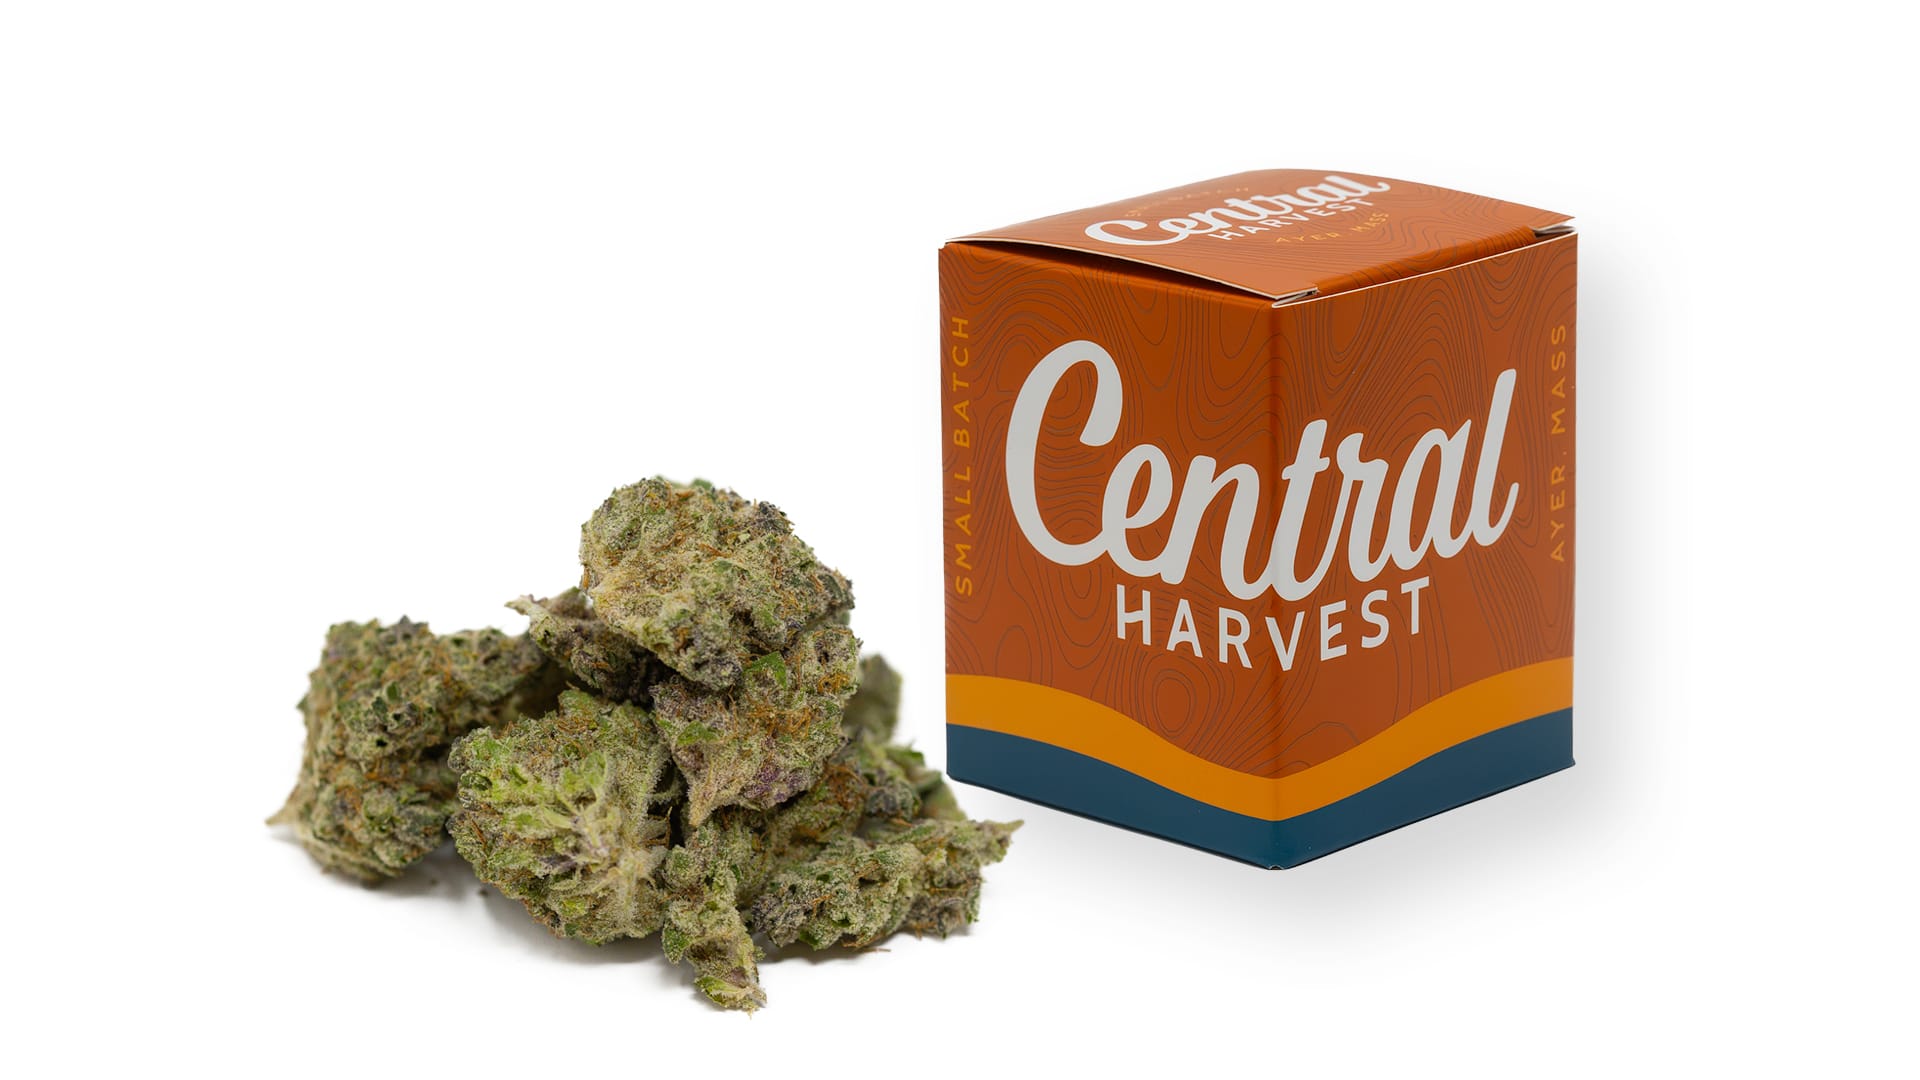 DCM Diesel is a Sativa Cannabis strain grown by Central Harvest